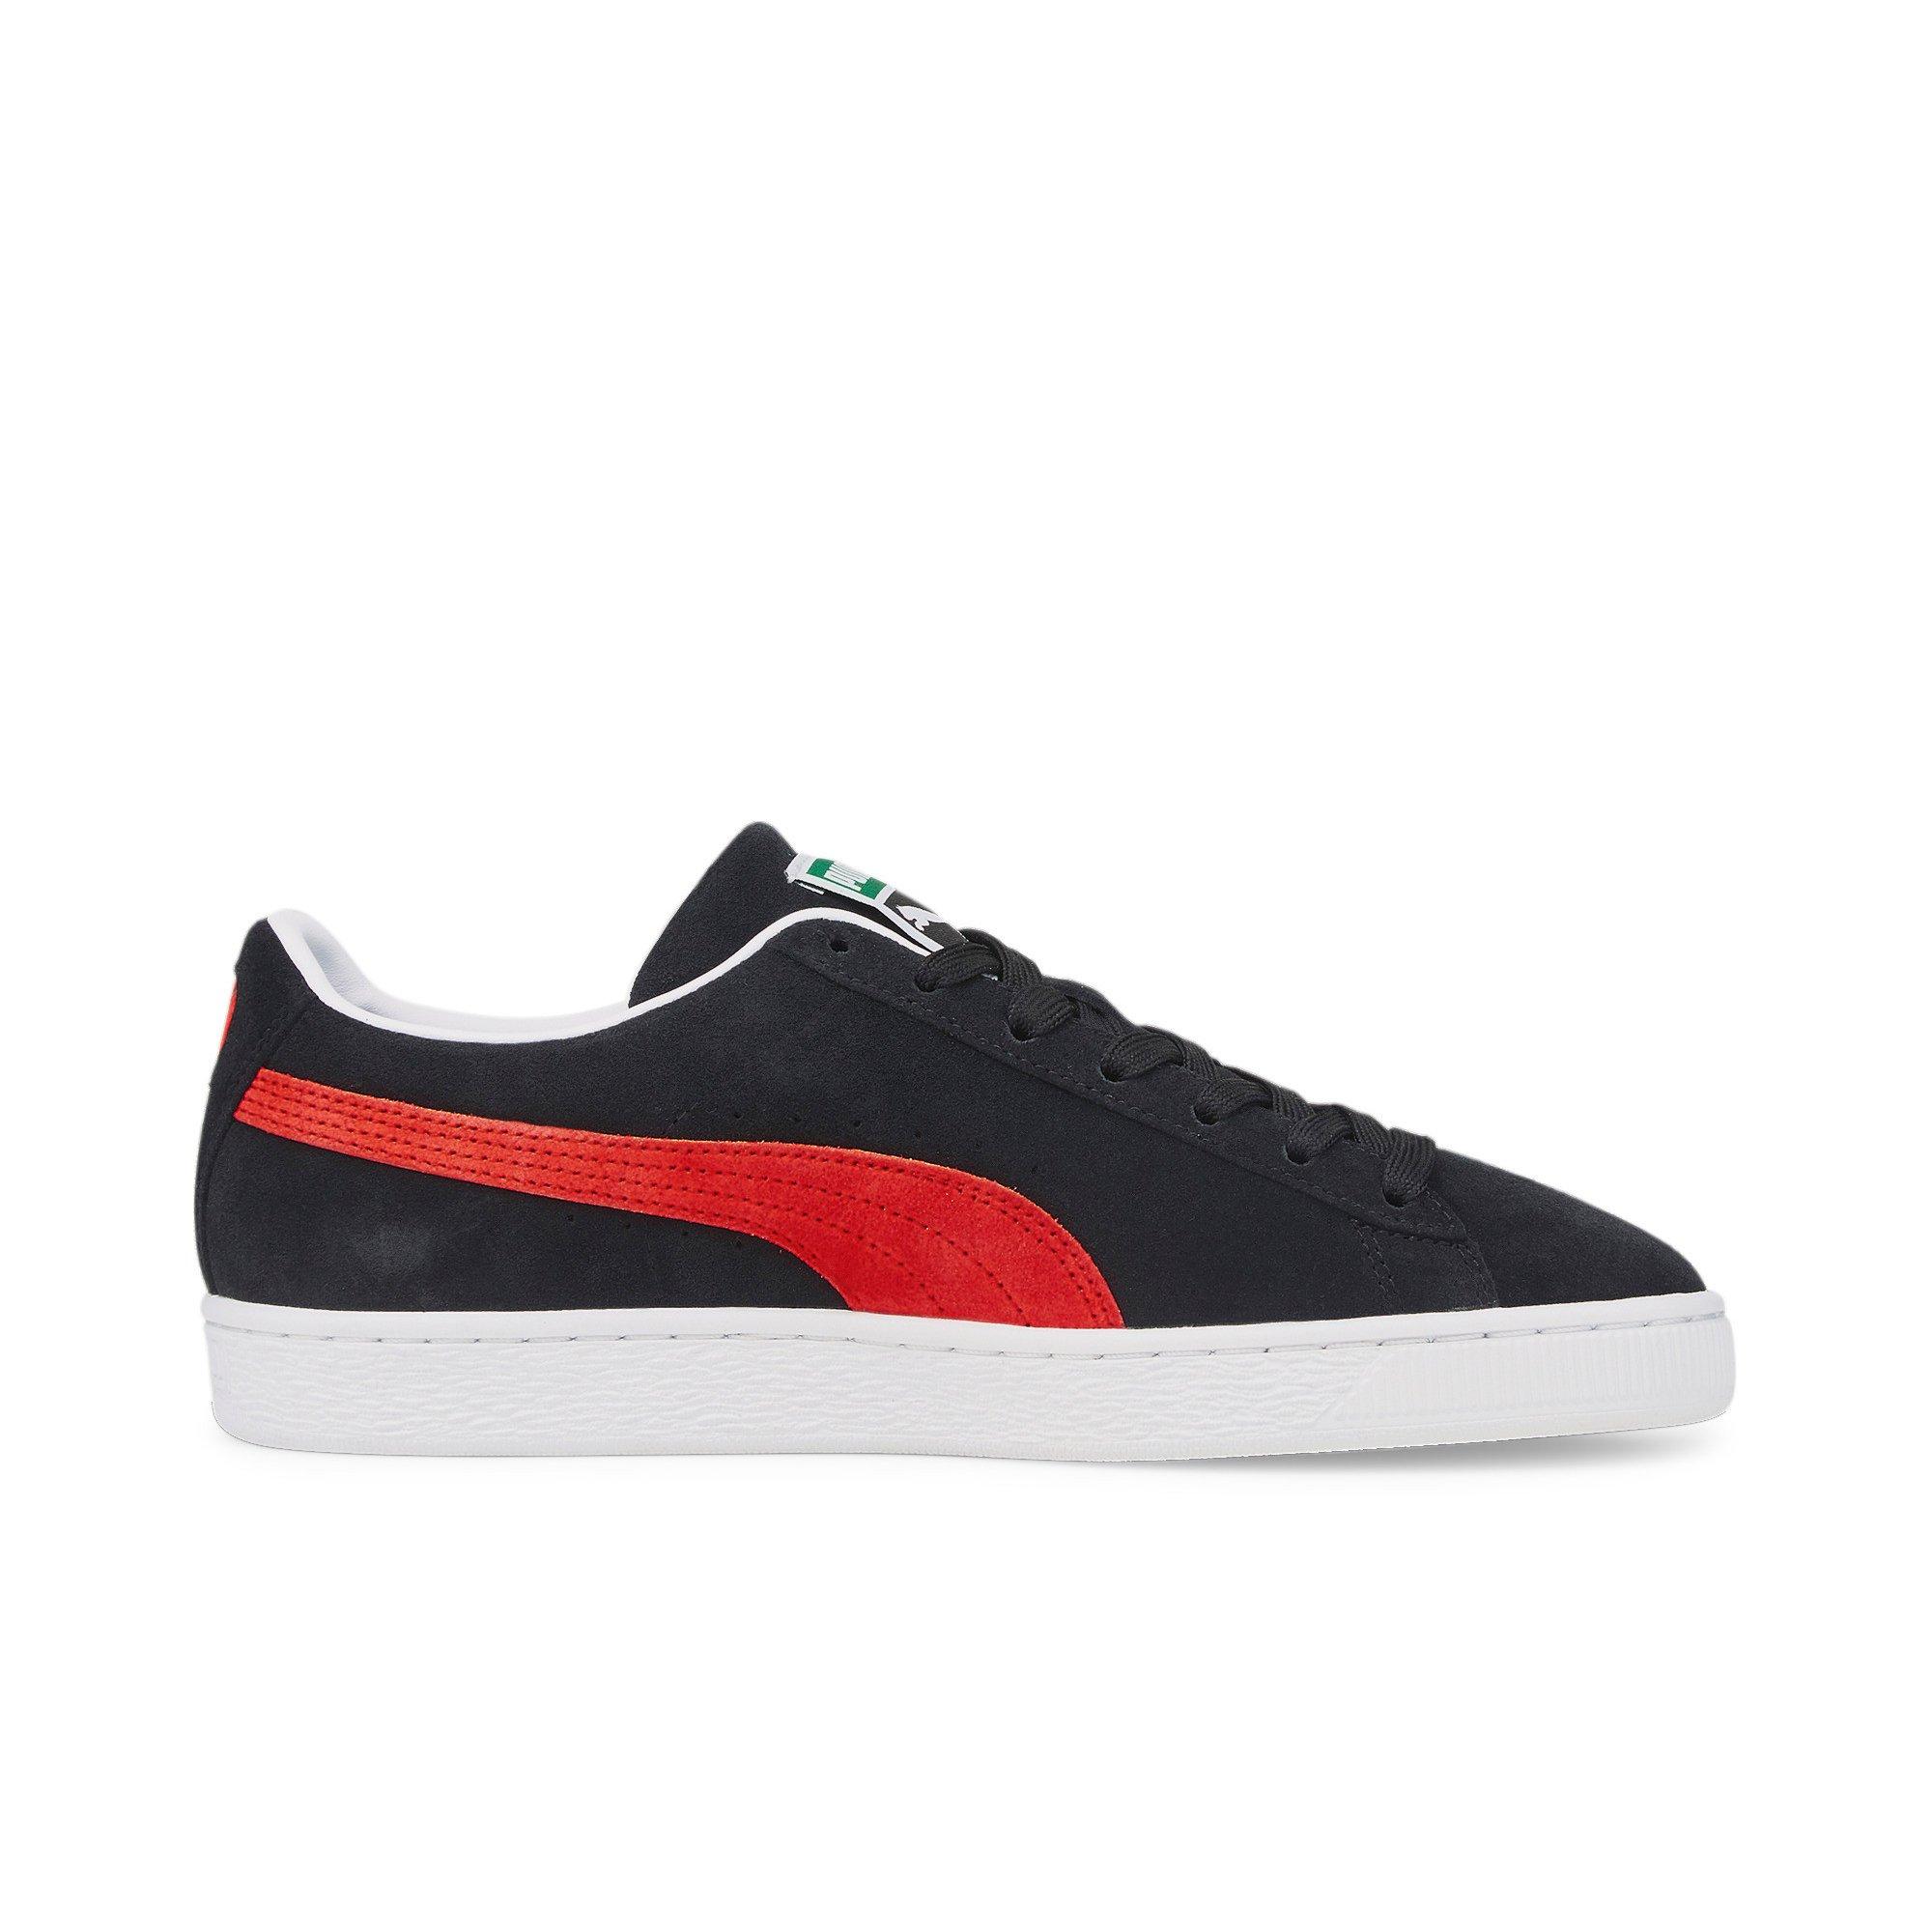 Overgave voedsel Wasserette PUMA Suede Classic Go For "Black/Red" Men's Shoe